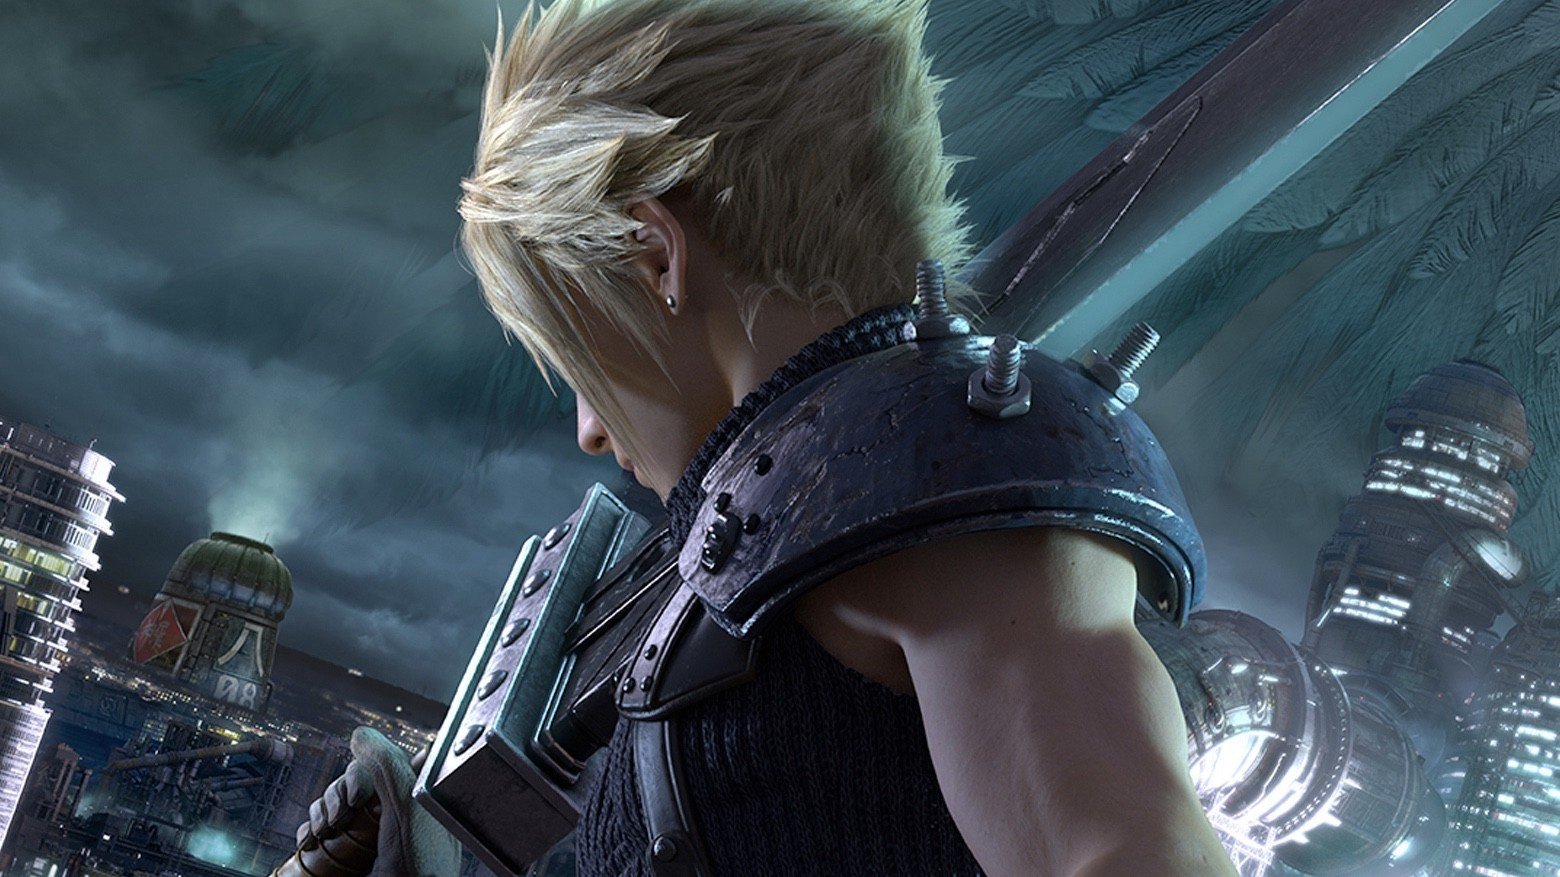 The non-release of the Remake of FINAL FANTASY VII on Xbox proves that  Square Enix still has no respect for FF fans. : r/FFVIIRemake